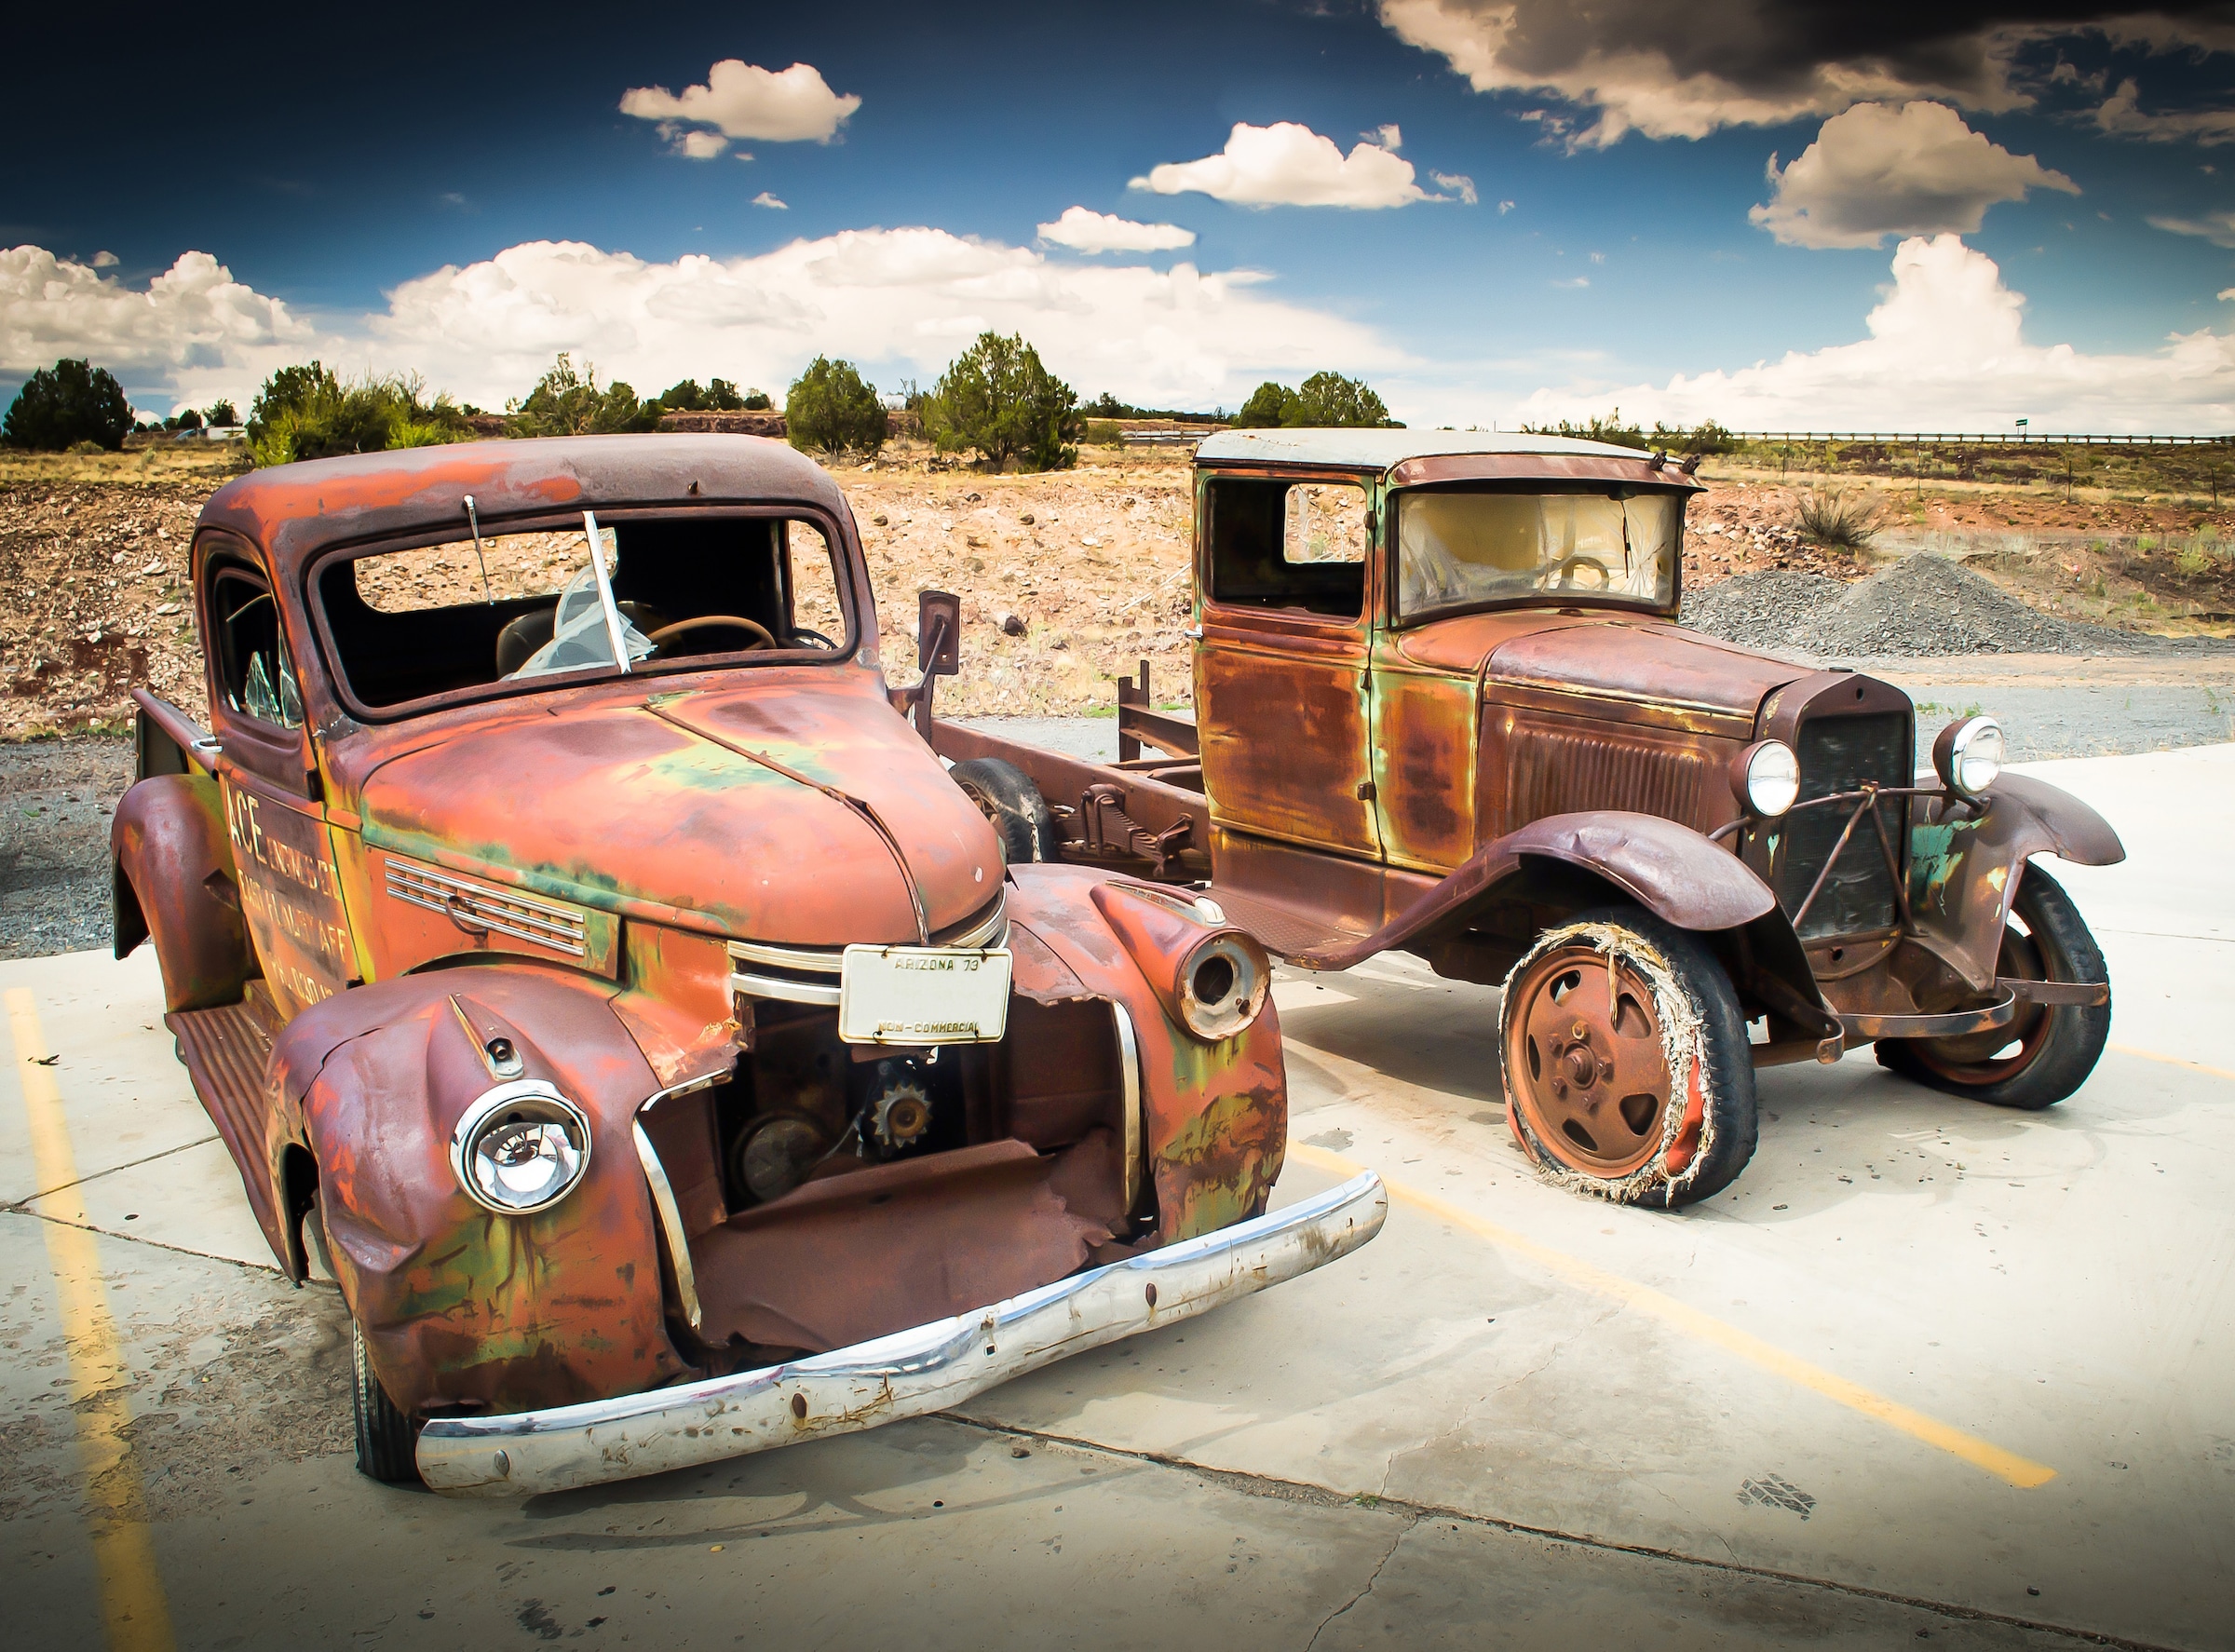 Papermoon Fototapete "Abandoned Old Cars"